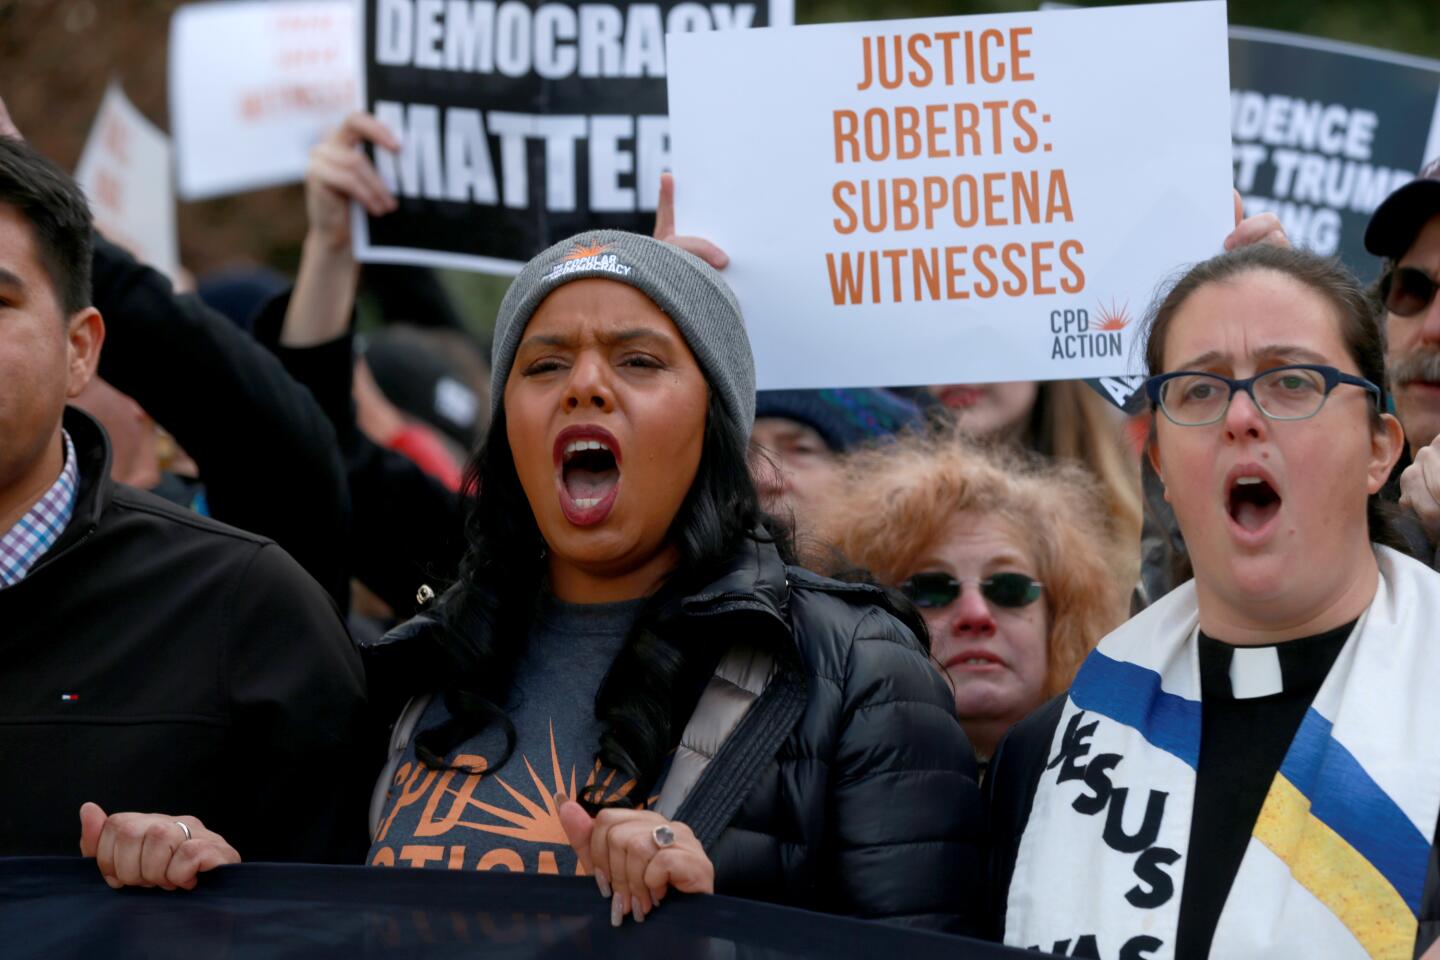 Demonstrators marched from the Hart Senate building to the Capitol during the start of Day 8 of the Senate impeachment trial of President Trump in Washington, D.C., on Wednesday.